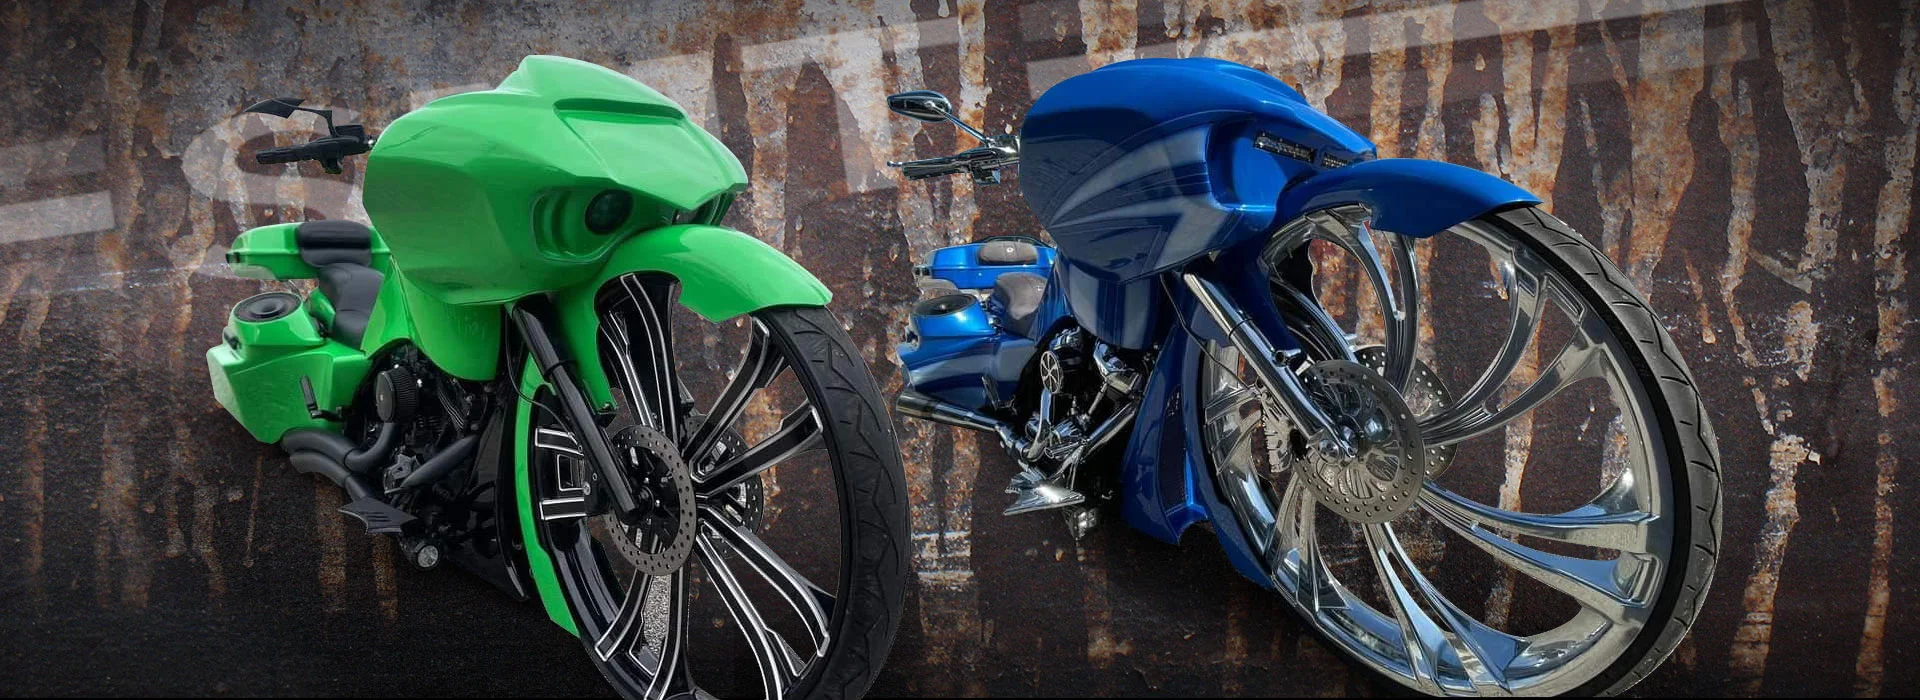 Why choose SMT for your Harley Road Glide wheels